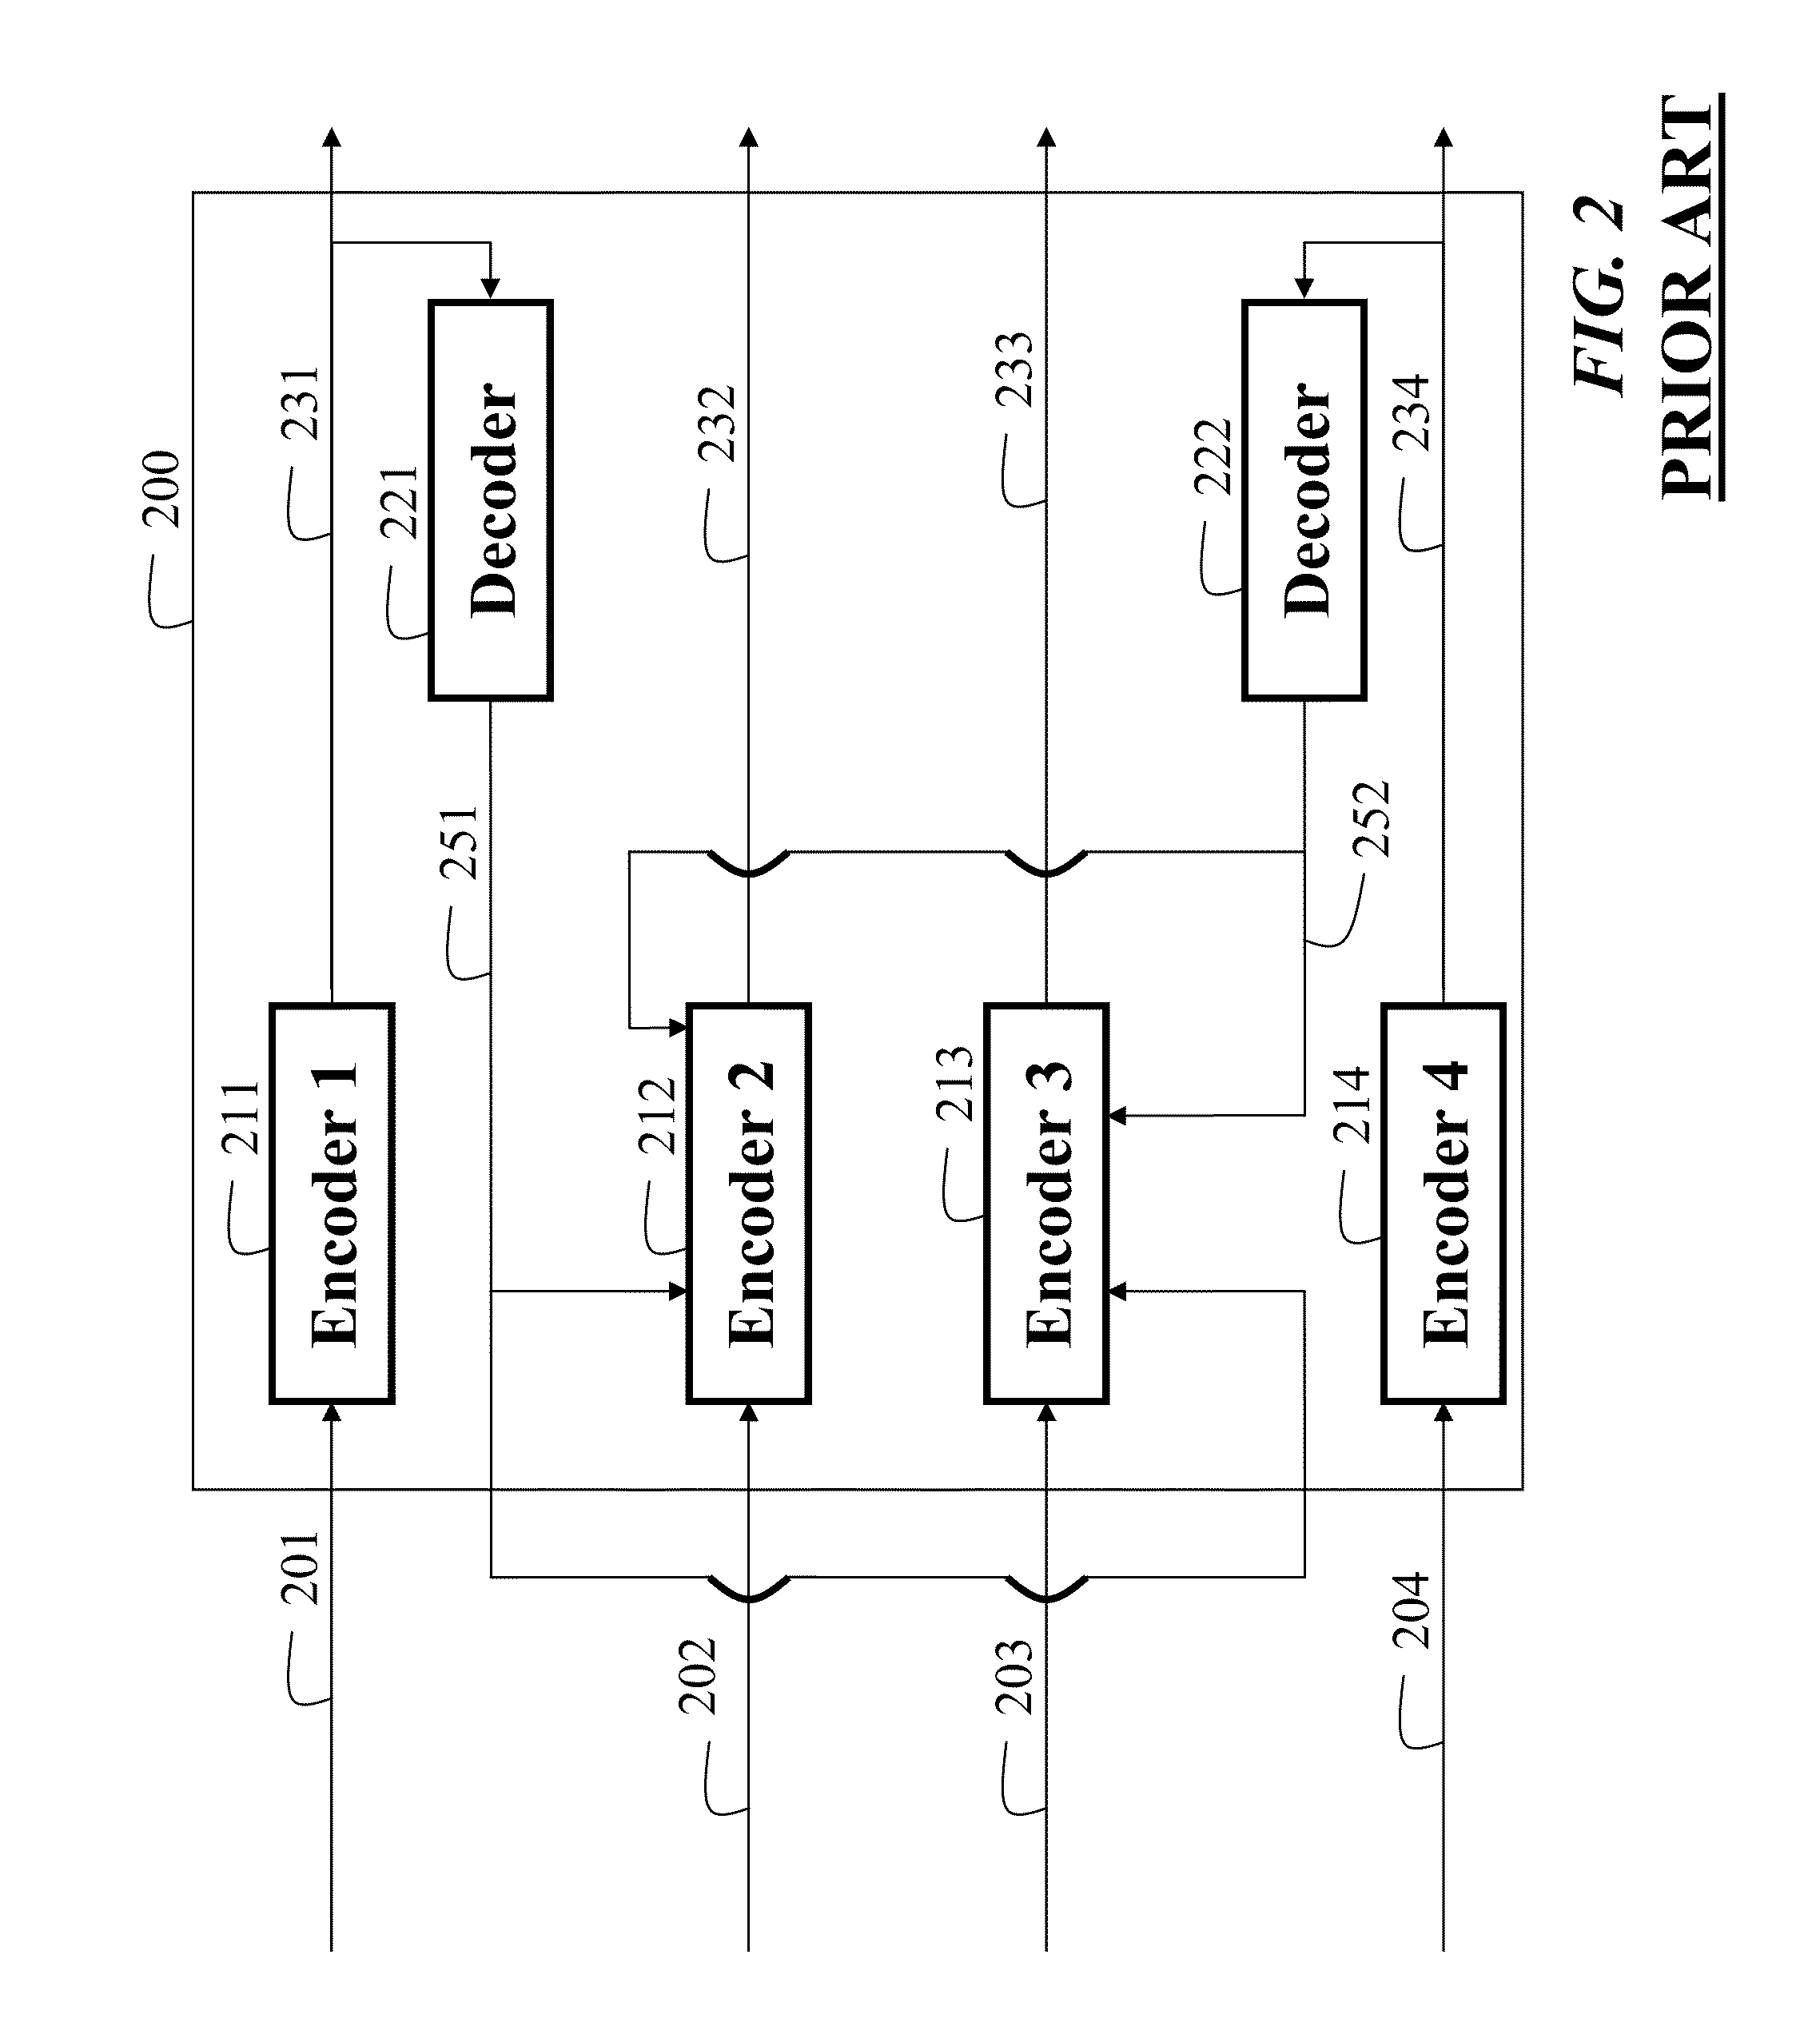 Method and System for Decoding Multiview Videos with Prediction Dependencies